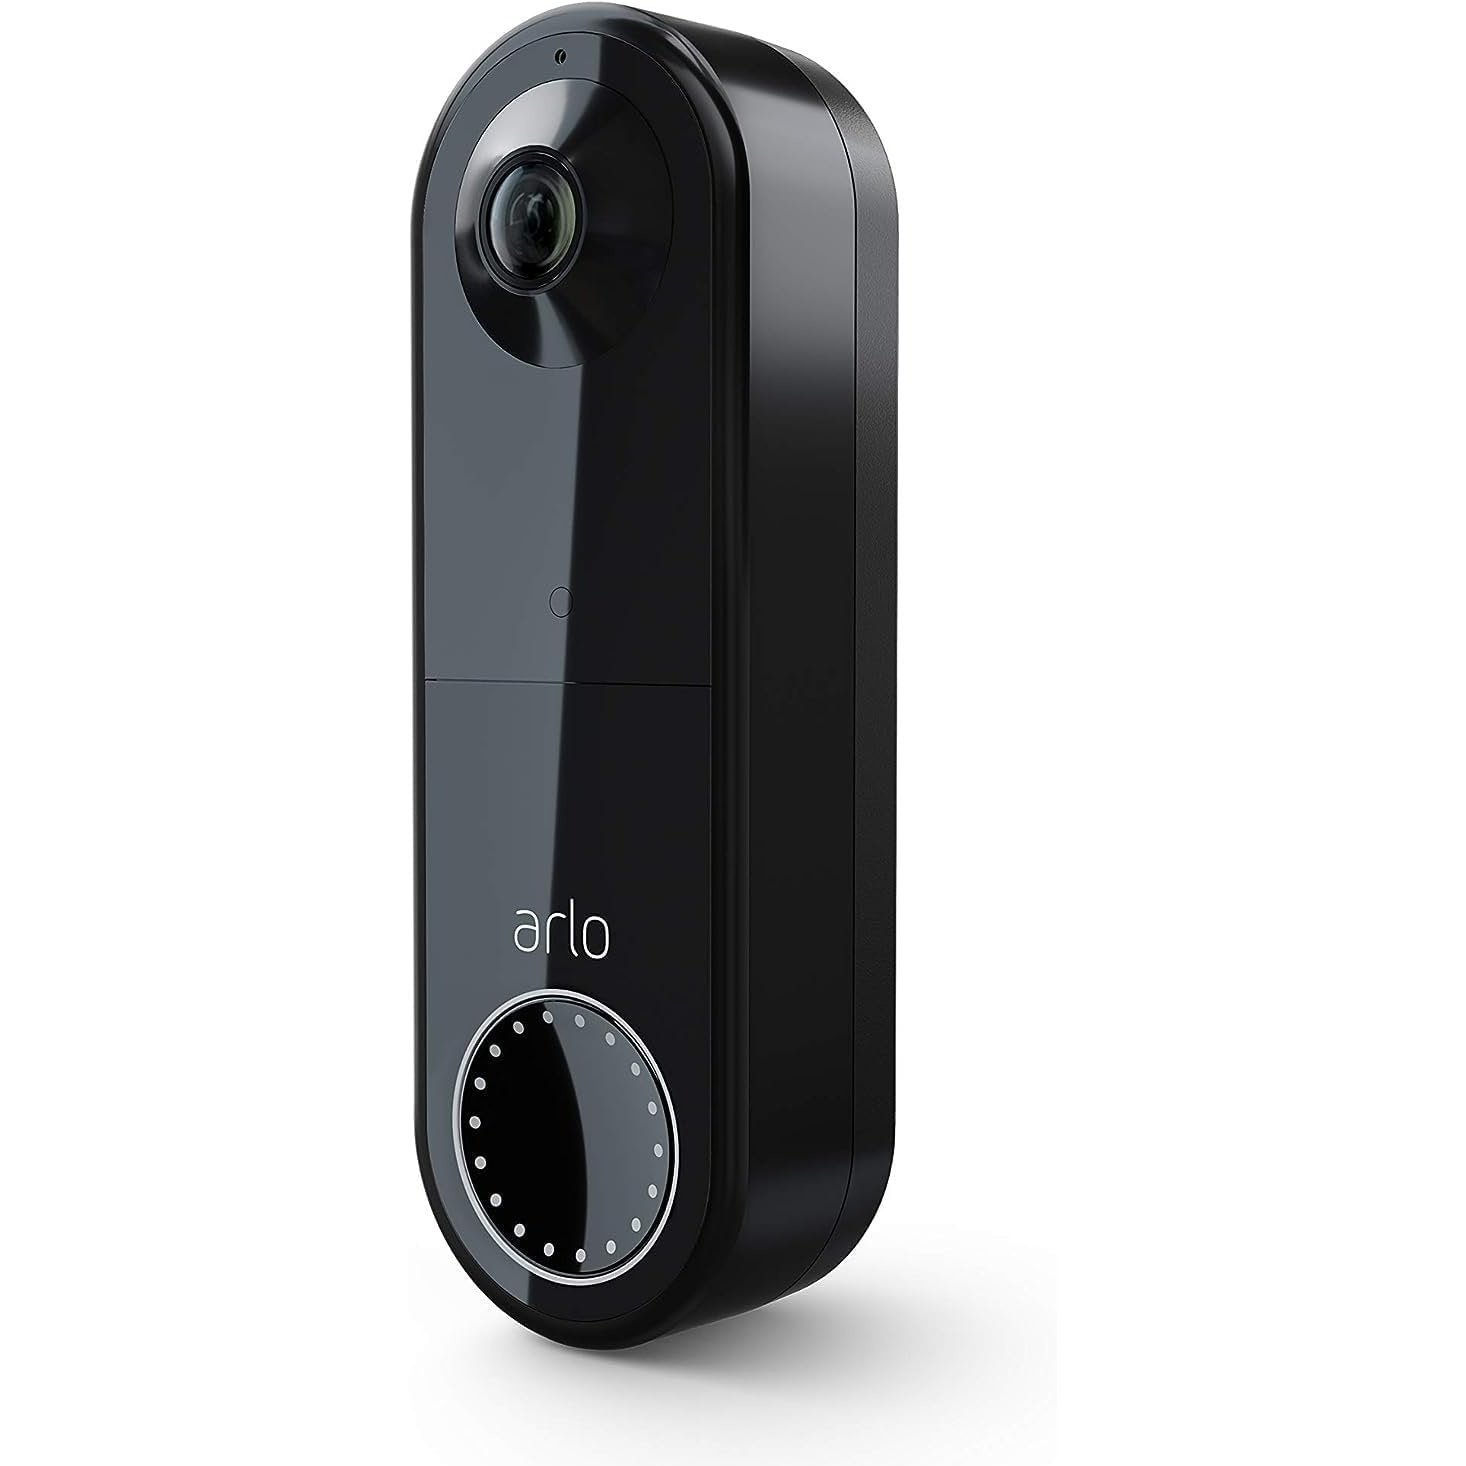 Arlo Essential Video Doorbell Wire-Free - HD Video, 180° View, Night Vision, 2 Way Audio, Direct to Wi-Fi No Hub Needed, Wire Free or Wired, Black - AVD2001B, 1 Count (Pack of 1)